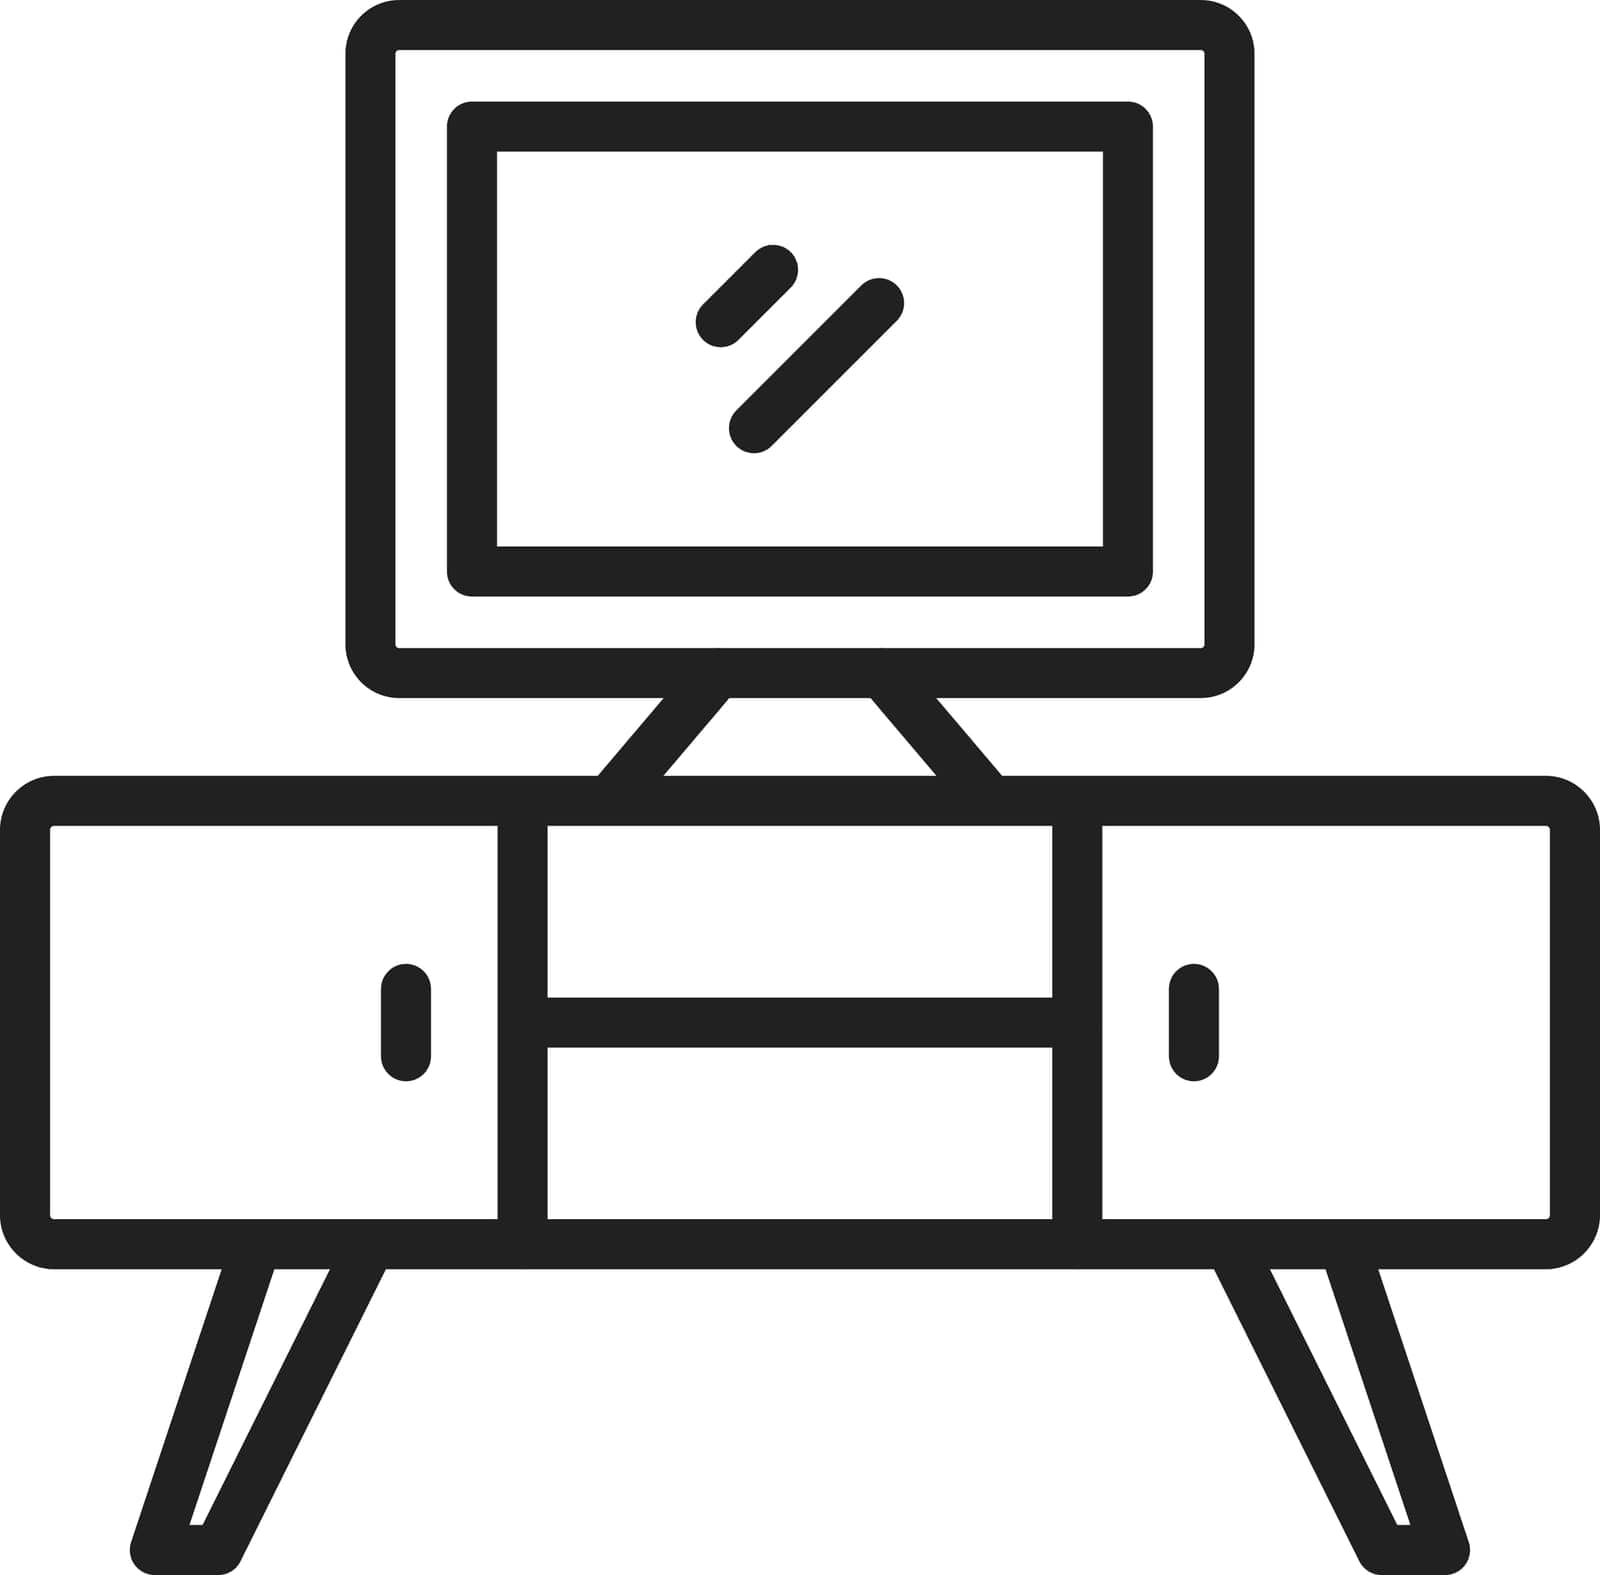 TV Stand Icon Image. by ICONBUNNY